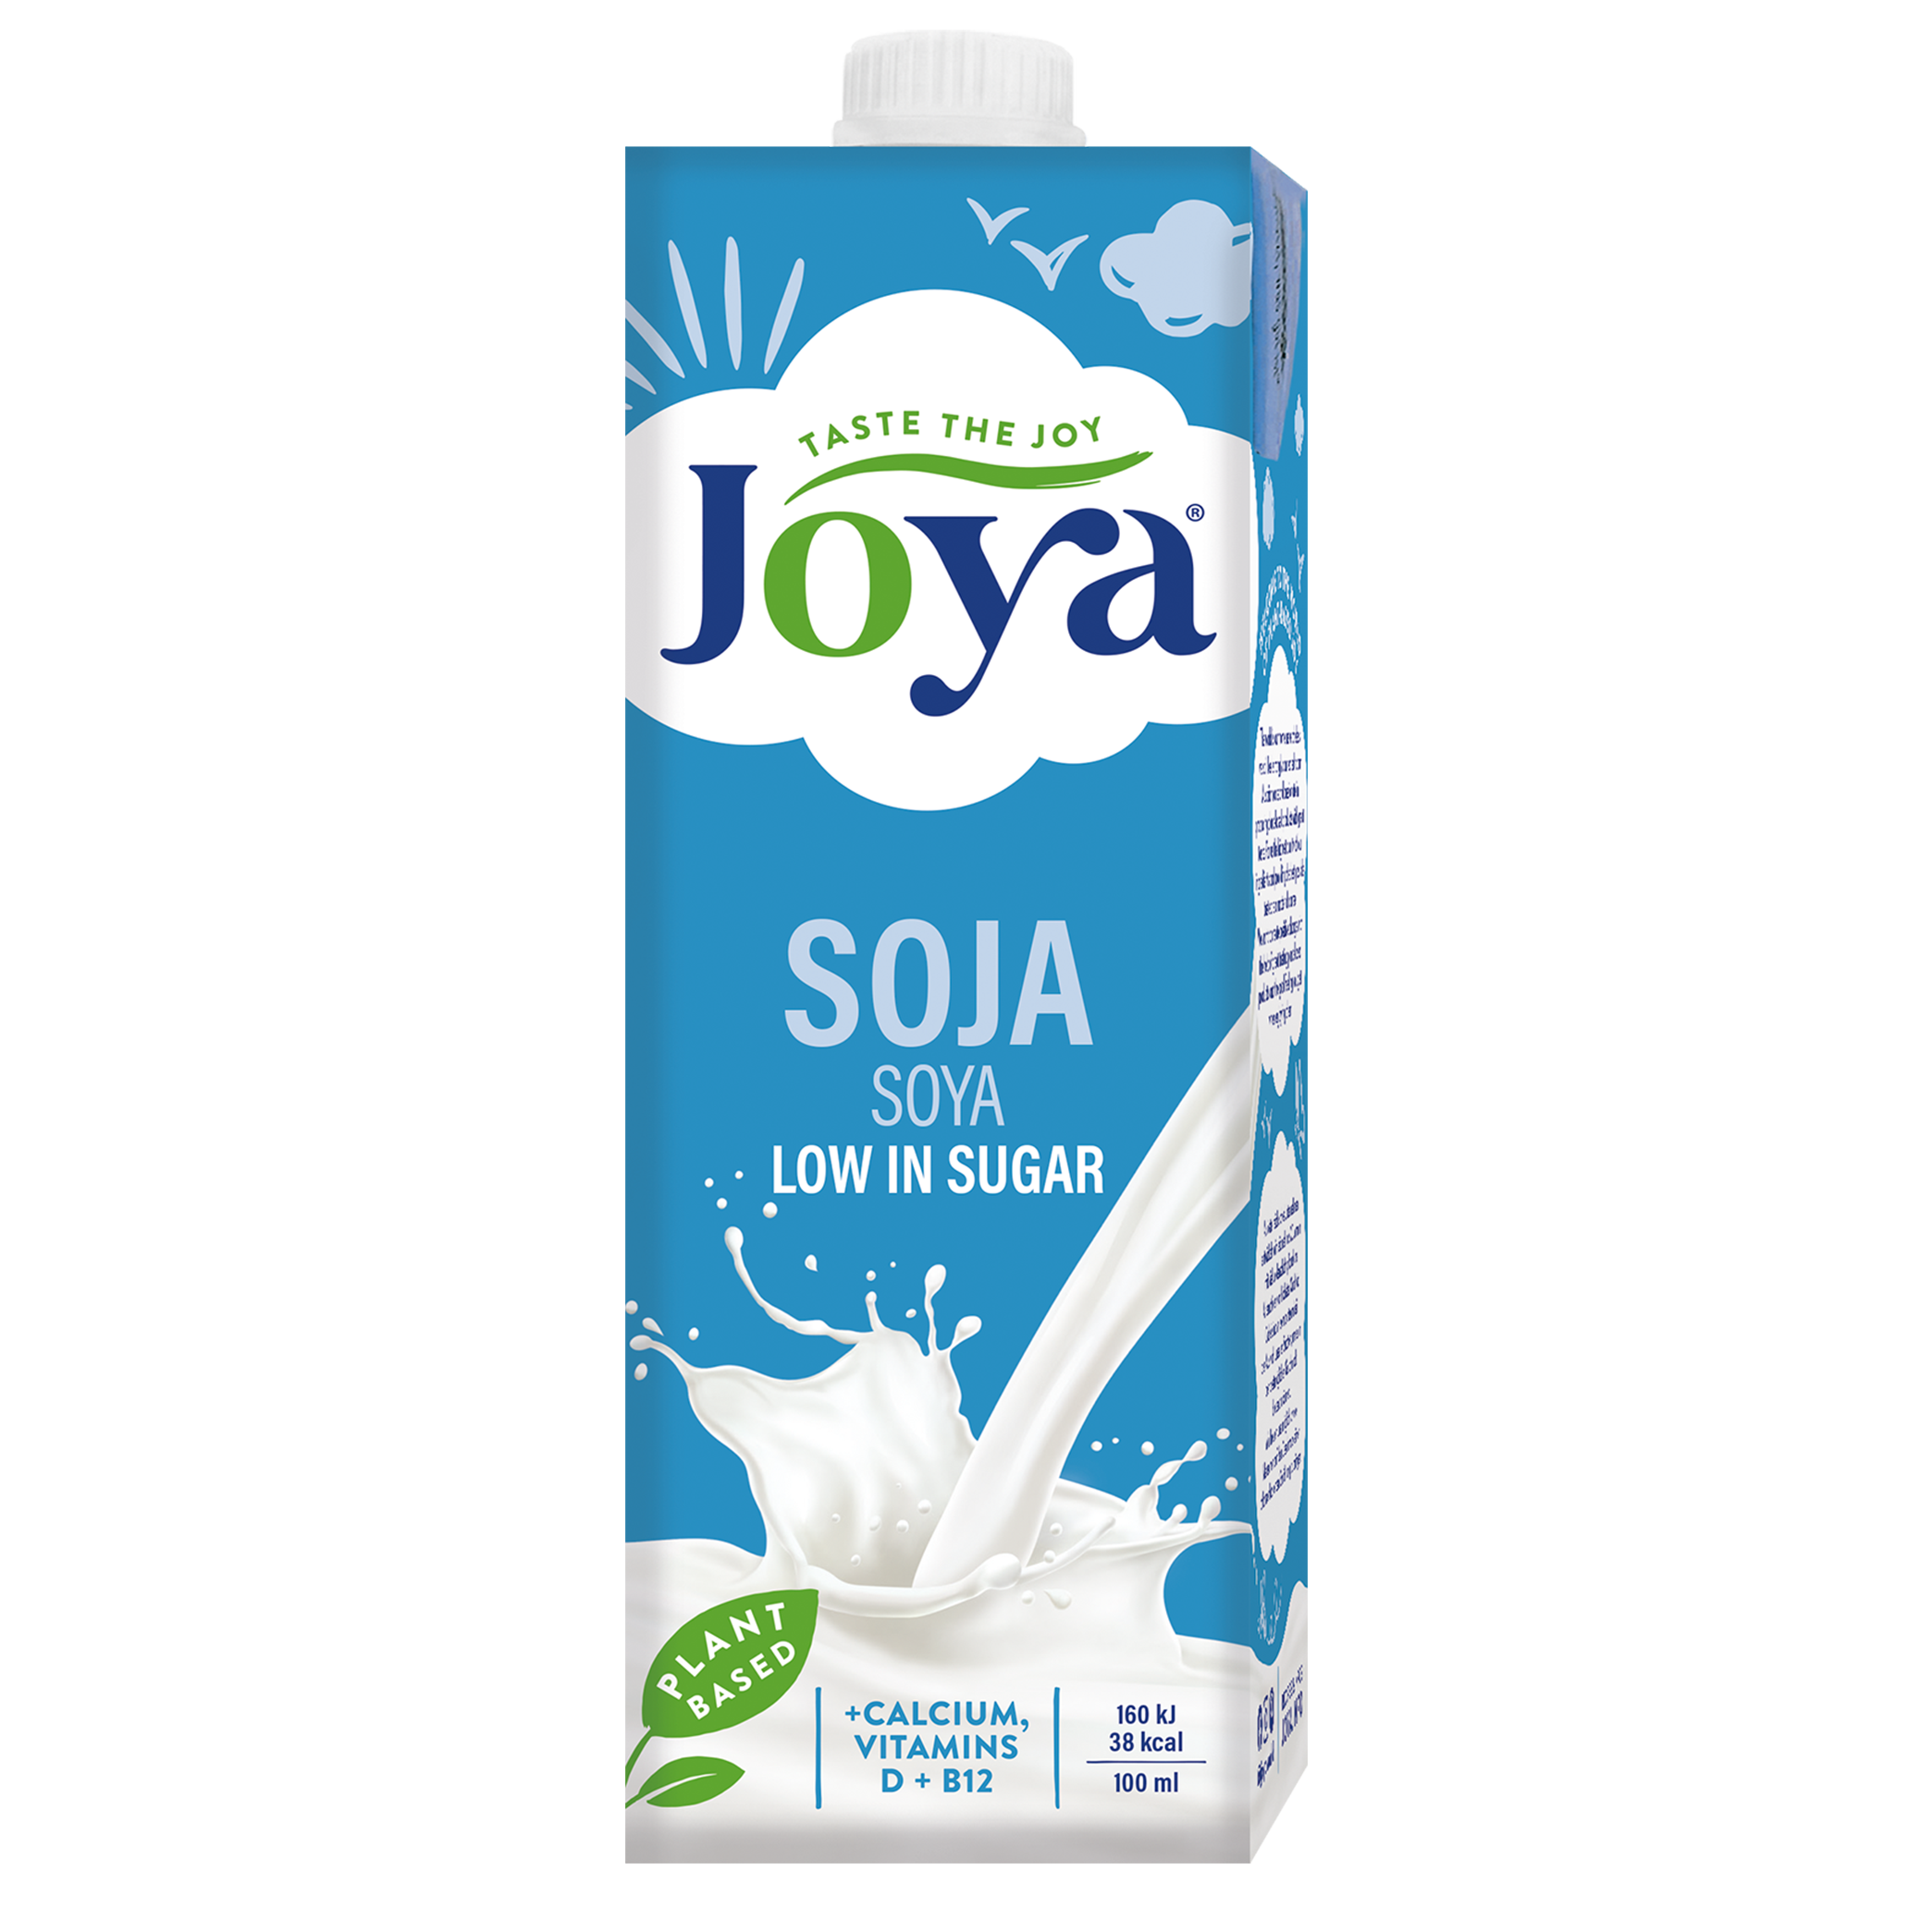 JOYA NATURAL UHT SOY DRINK WITH CALCIUM